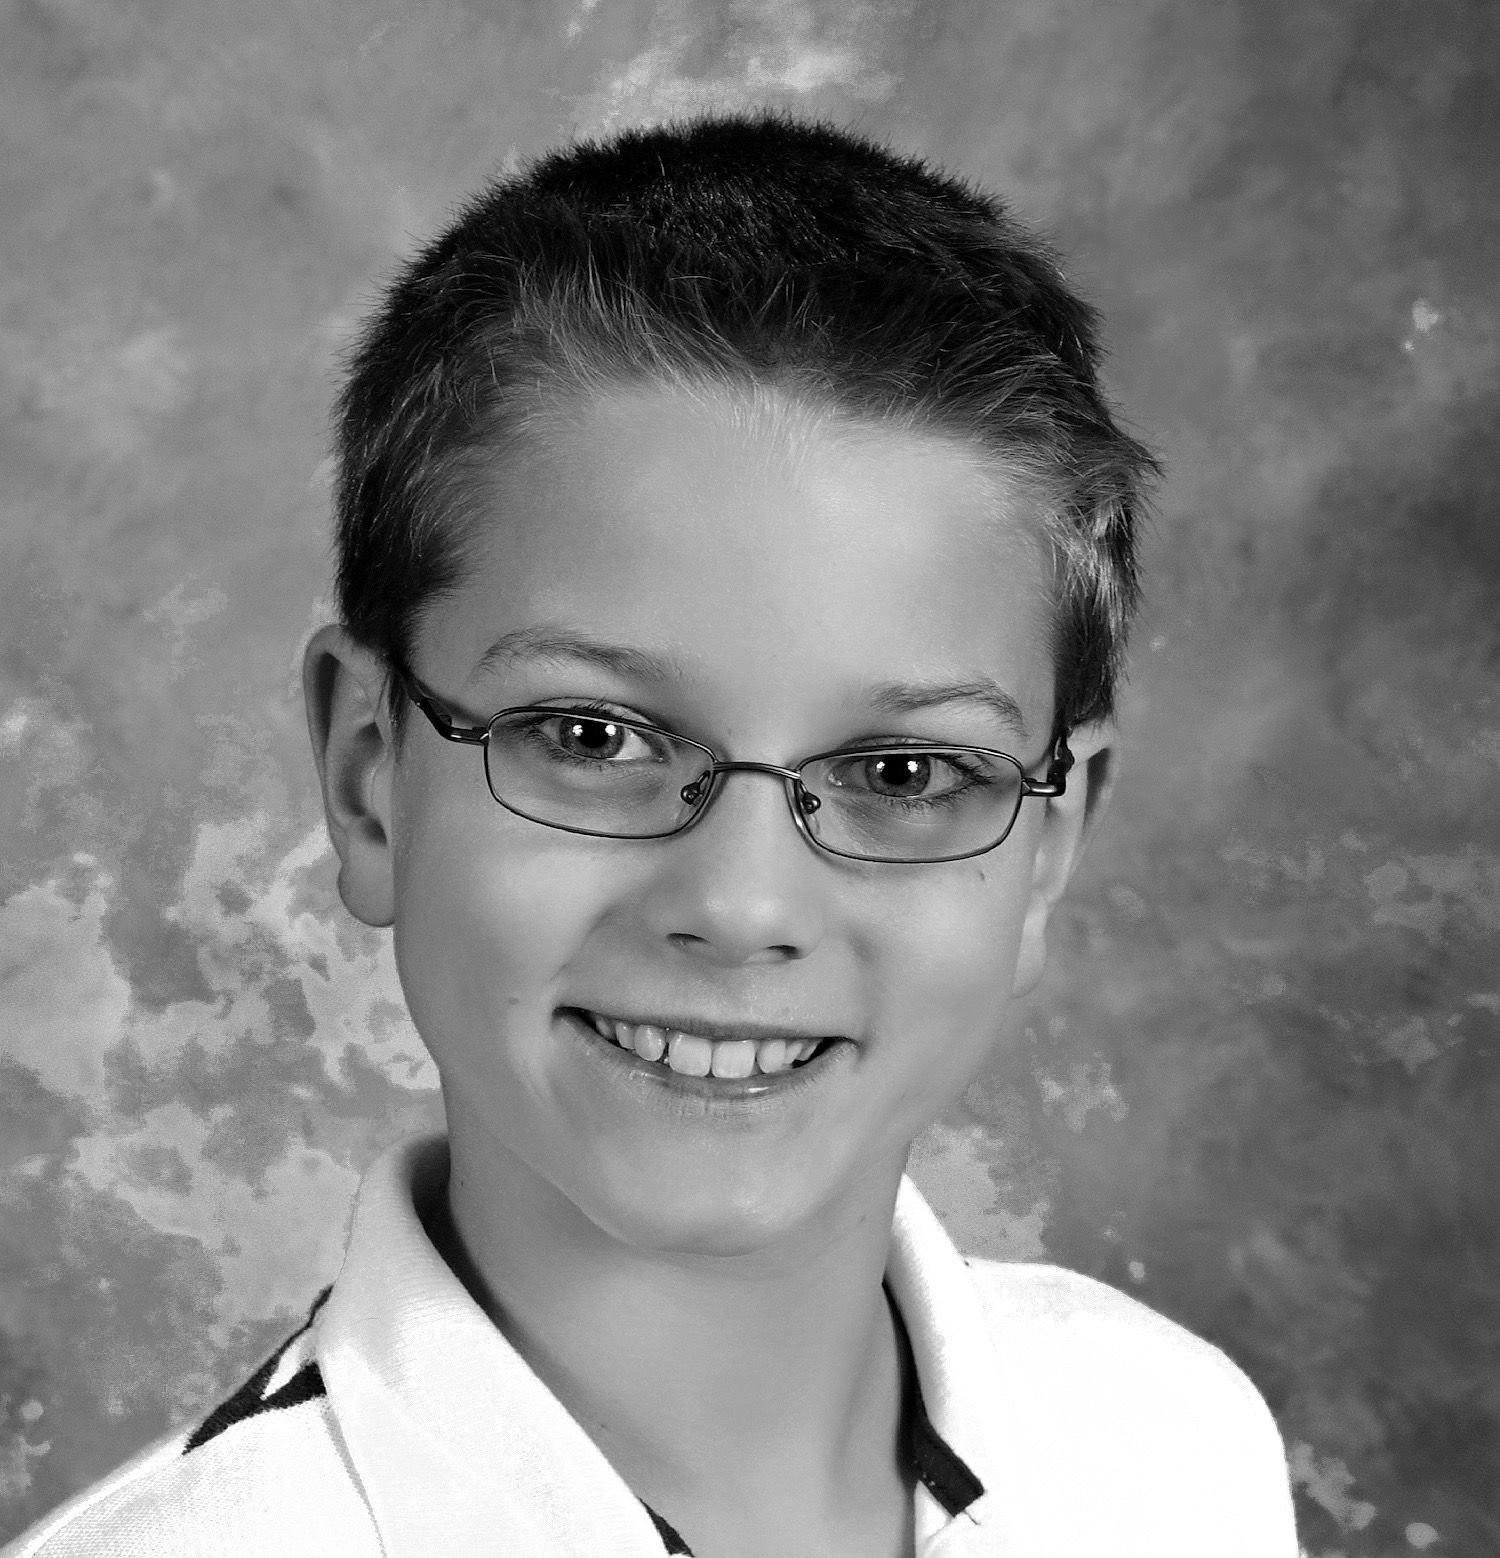 Shown here is a portrait of a nine year old boy. Image is like a school picture or yearbook photograph.